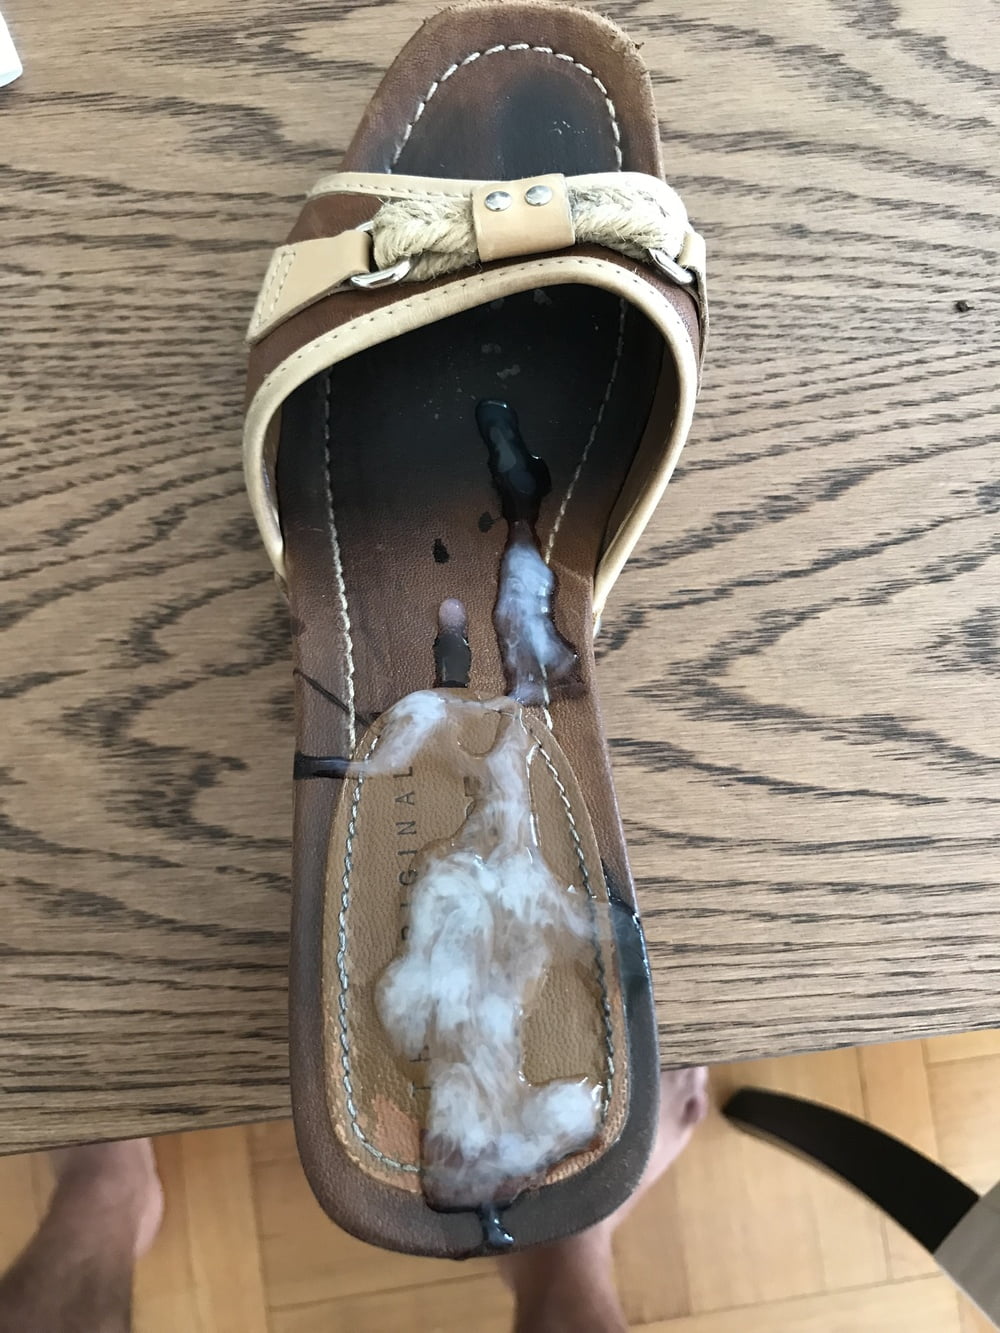 Cumming on shoes